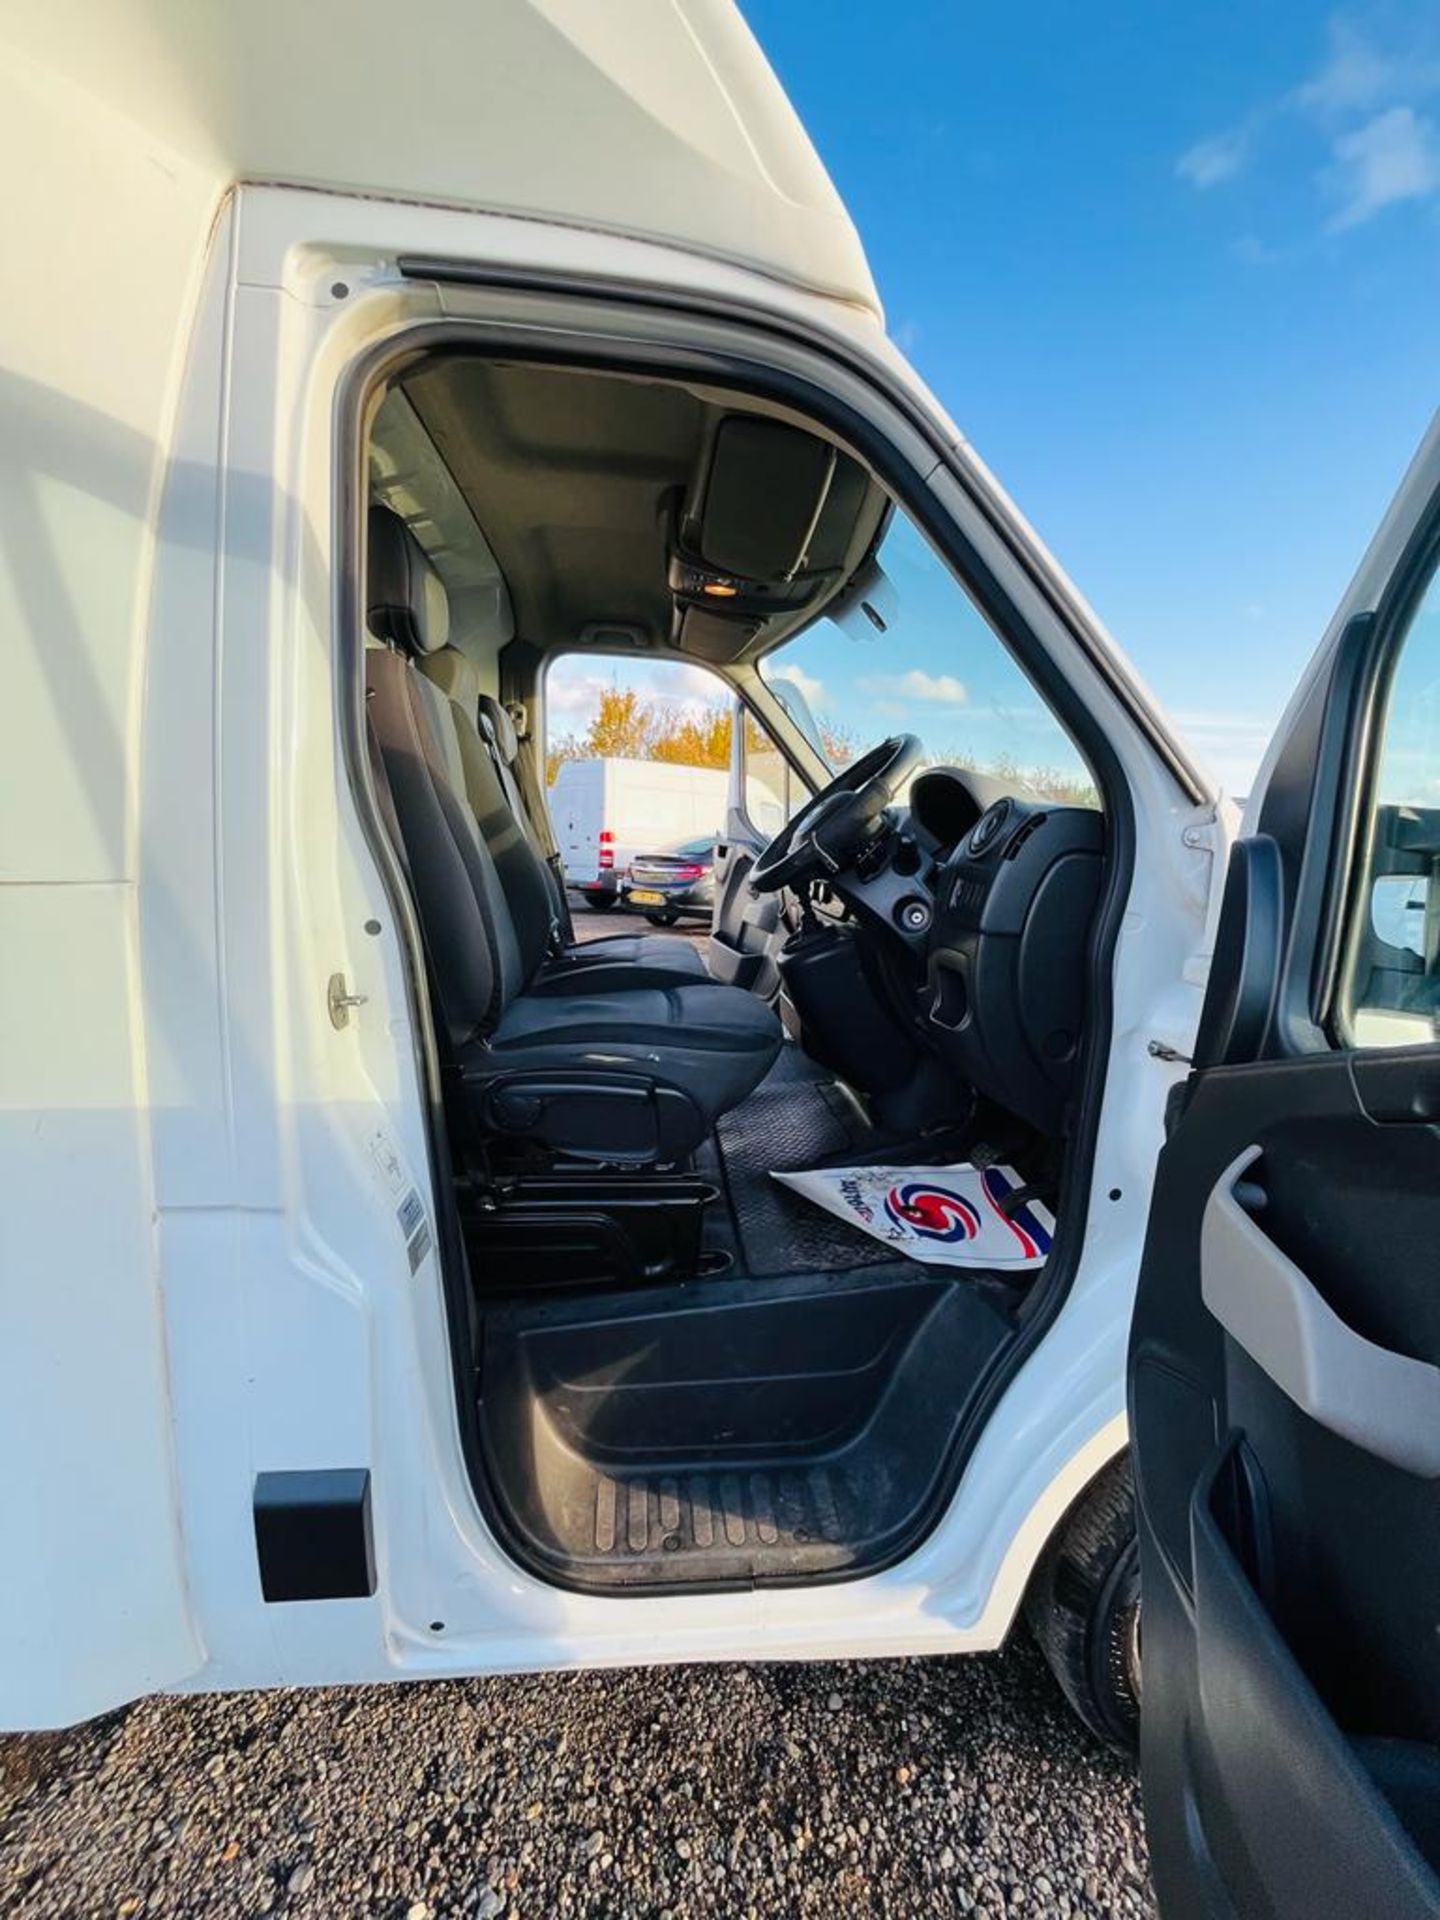 ** ON SALE ** RENAULT MASTER 3.5T RWD 2.3 LL35DCI 125 Luton 2014 "14 Reg" - A/C - Bluetooth - Image 11 of 22